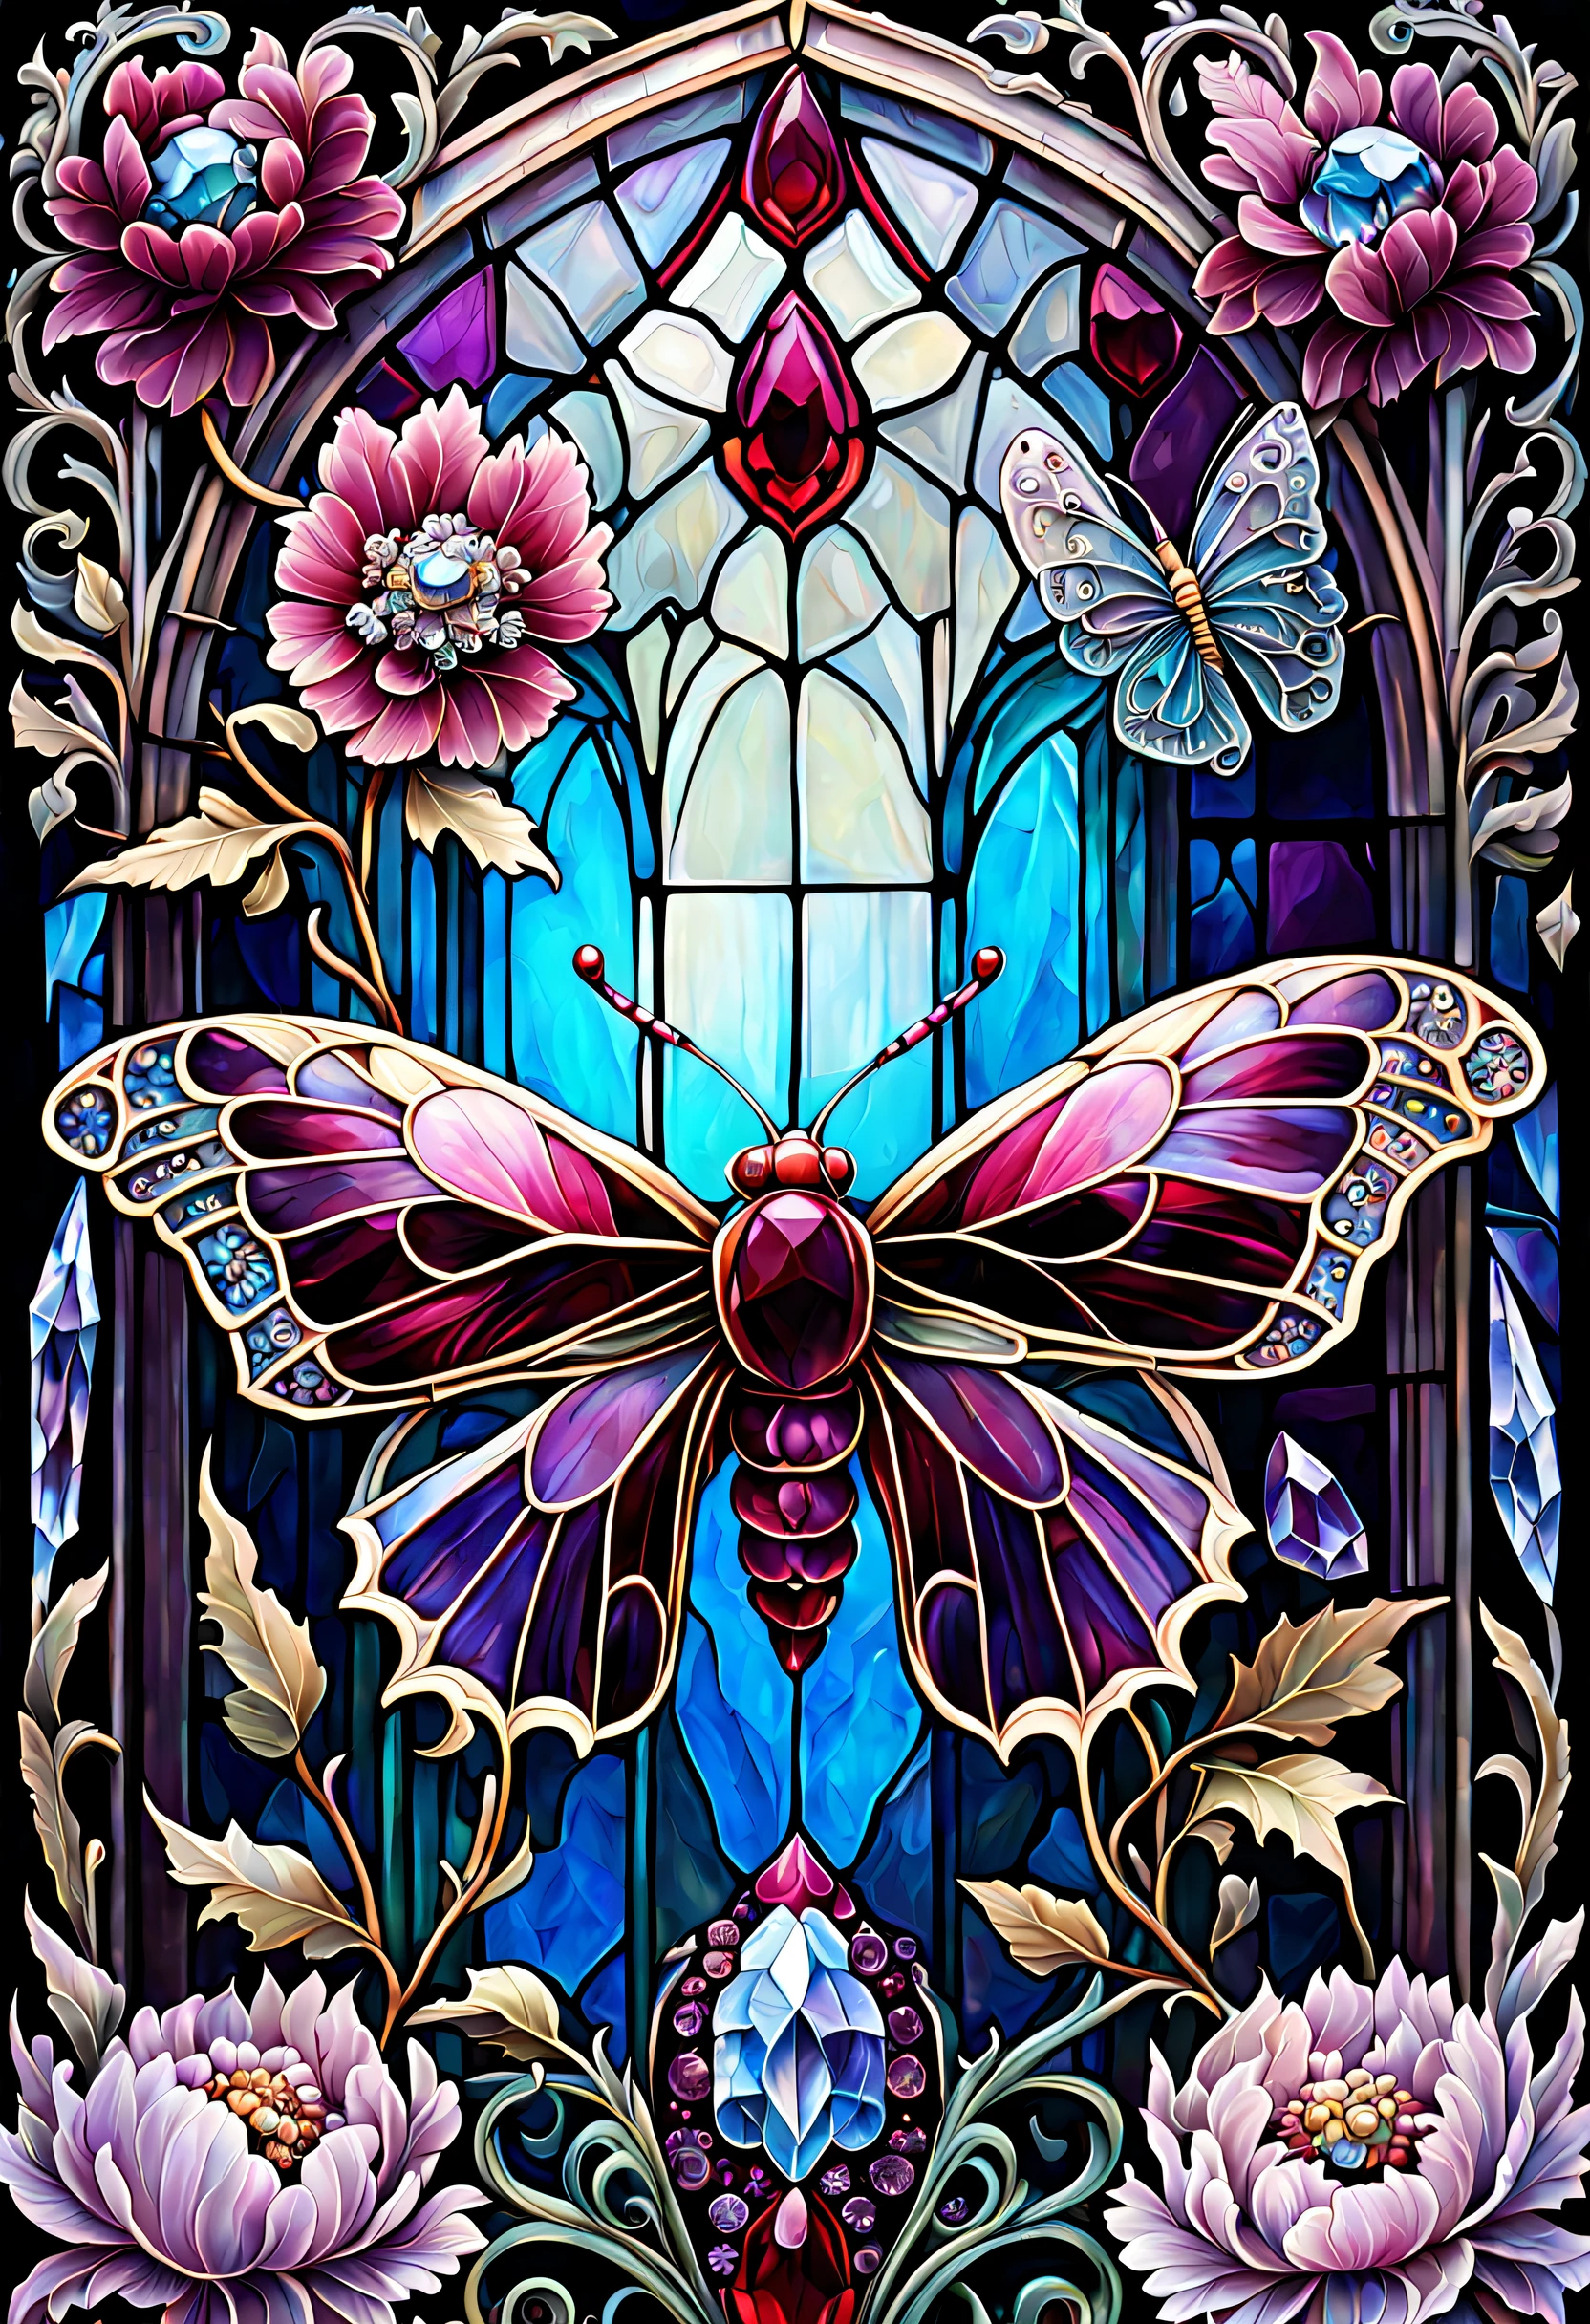 triadic colors, cinematic, official art, close fairytale transparent glass moth ruby peony flowers, ice hoarfrost, baroque, Craola, highly detailed stained glass wings, amethyst crystals, labradorite iridescent crystals, Andy Kehoe, John Blanche, complex highly detailed background,  book detailed illustration, fantasy, filigree, filigree detailed, intricated, cute